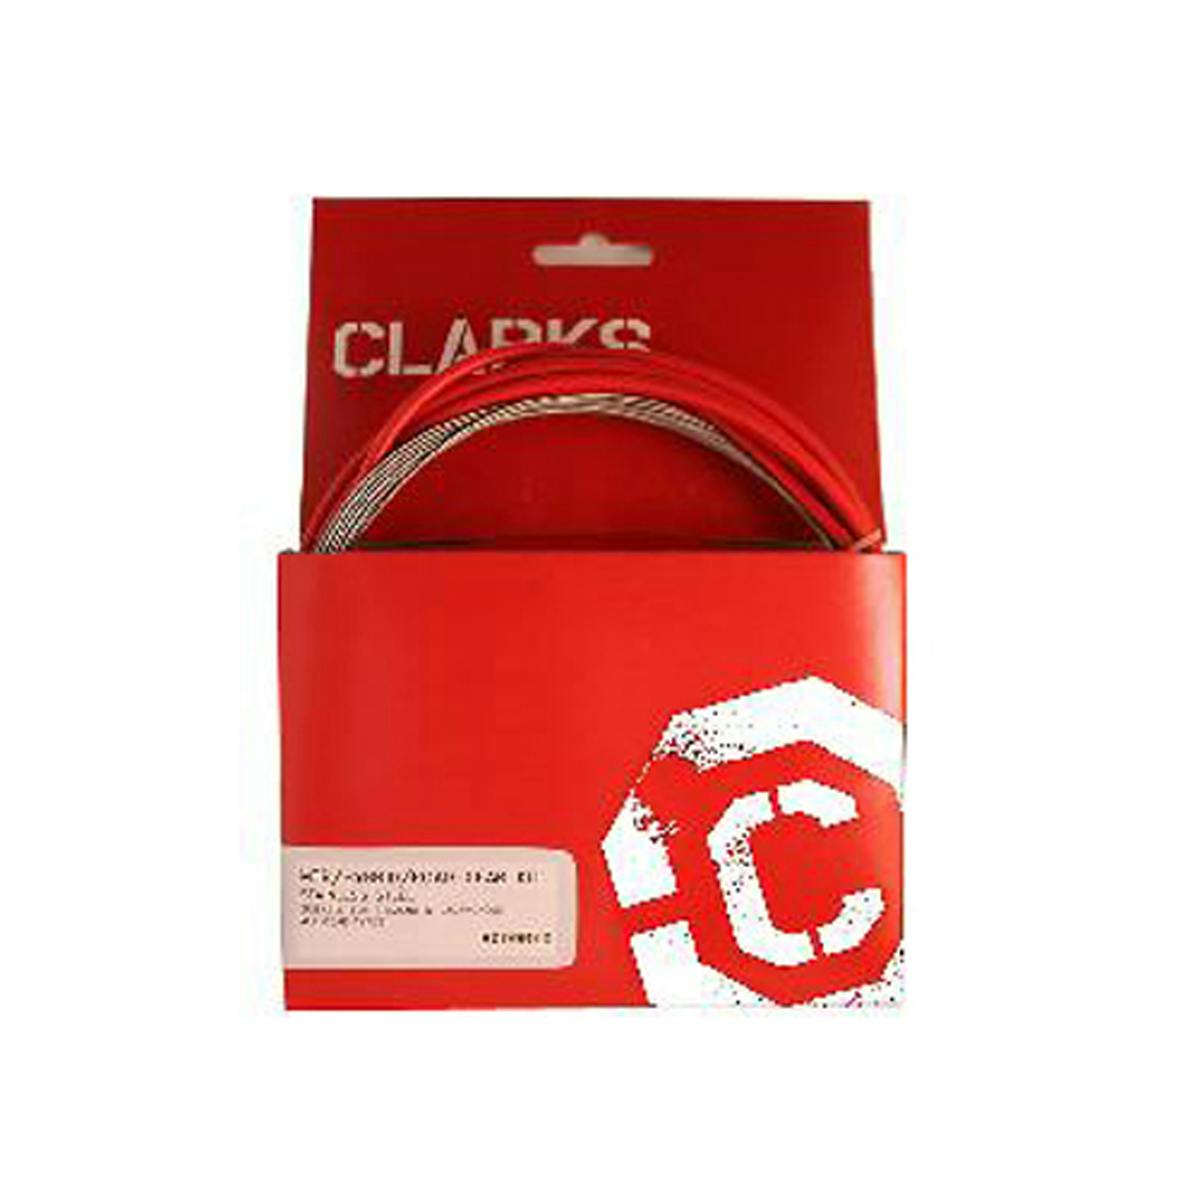 Clarks Stainless Steel Gear Kit Compatible with MTB/Hybrid/Road · Red · 2030mm, Stain